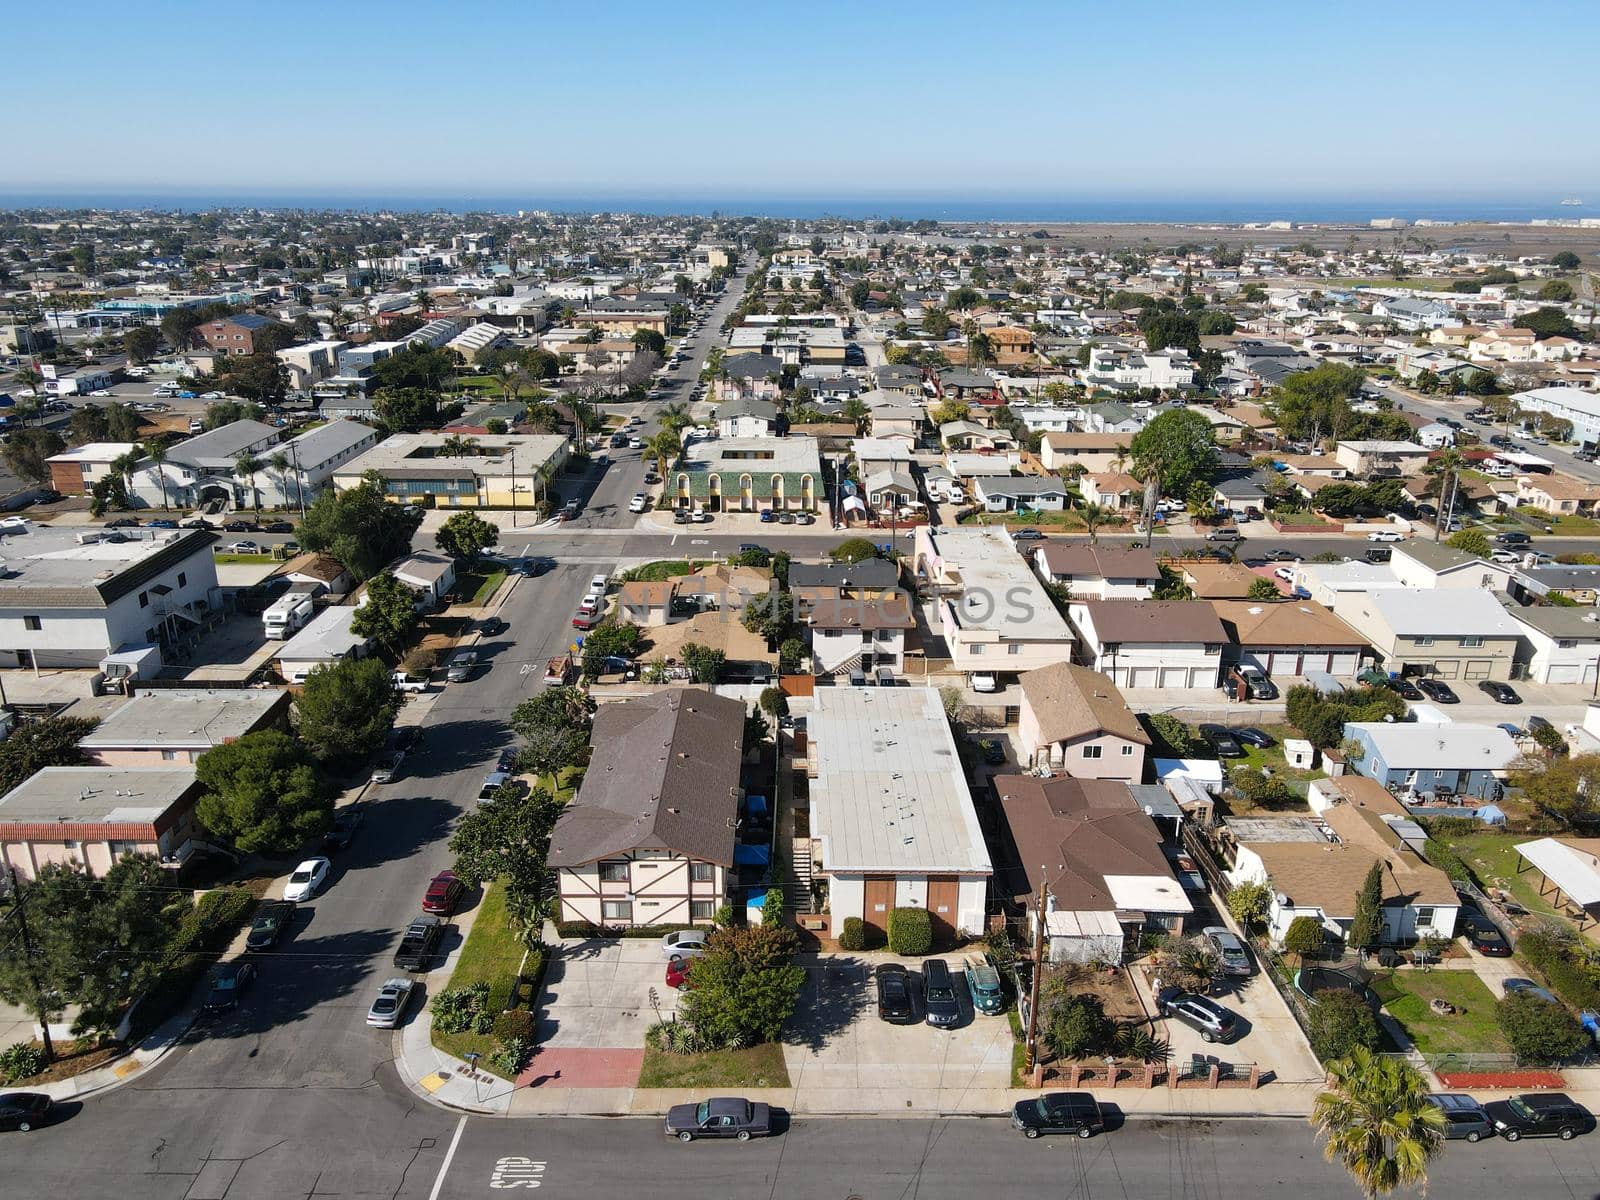 Aerial view of street and houses in Imperial Beach area in San Diego by Bonandbon